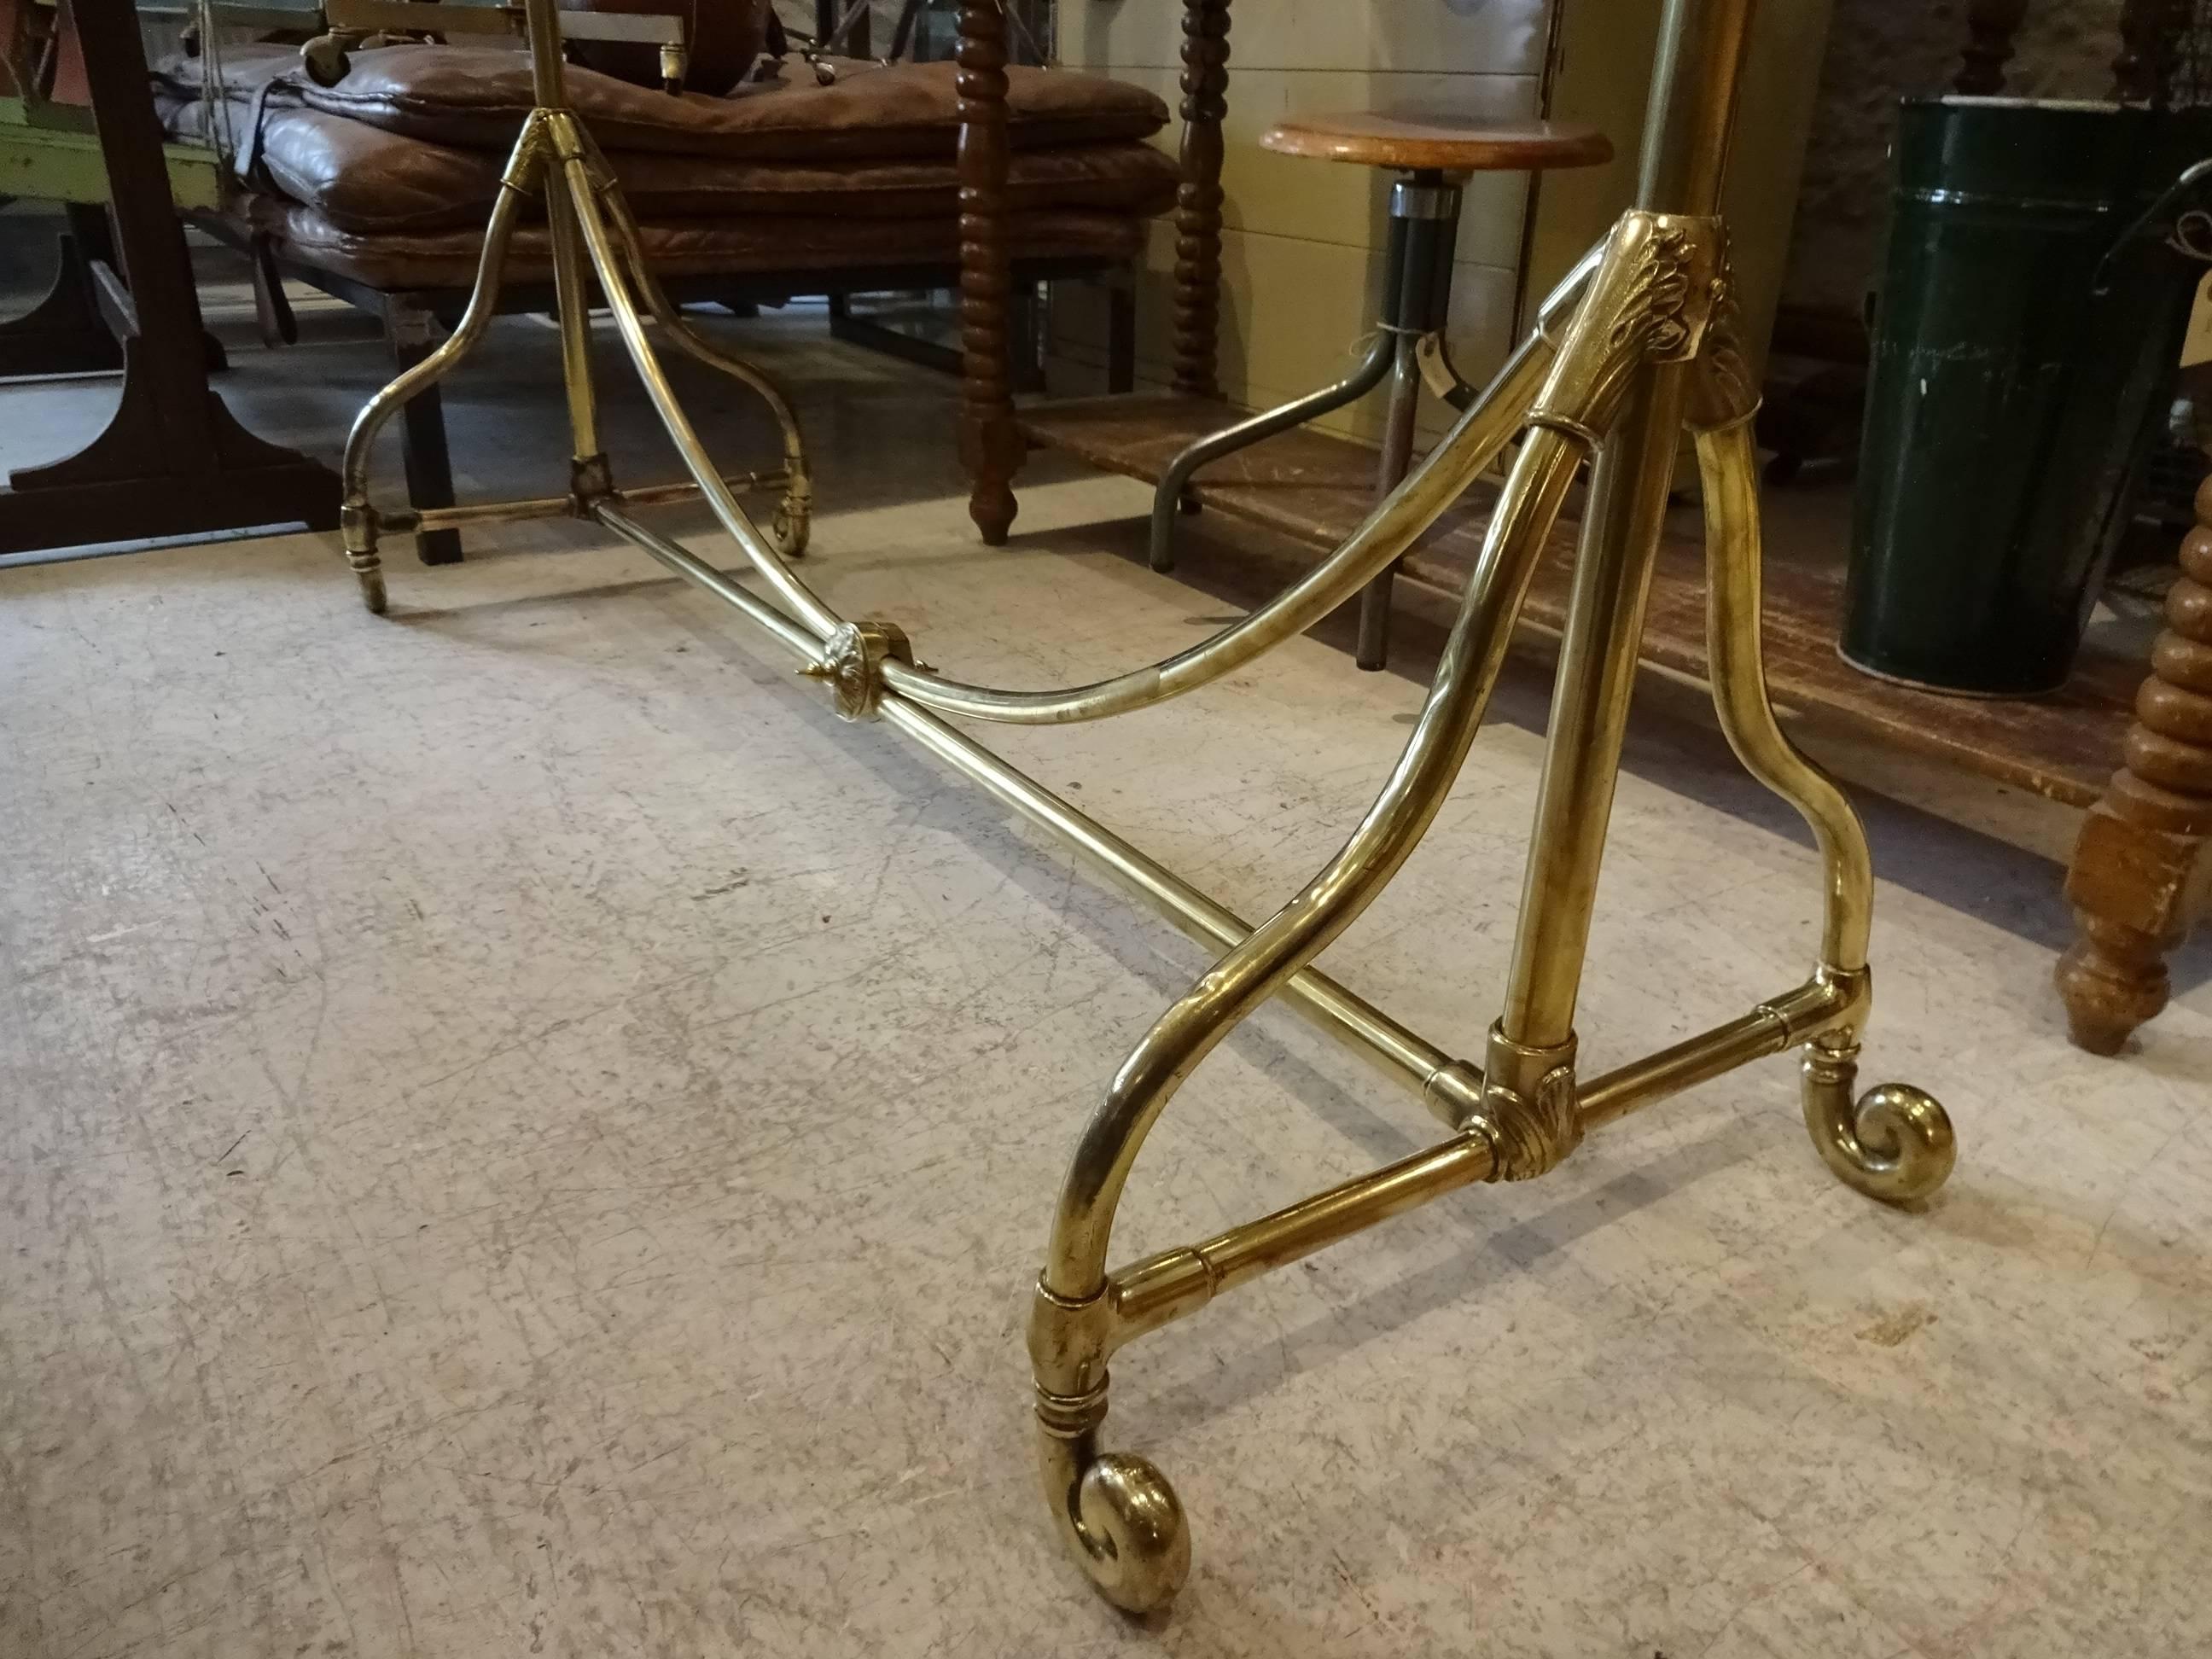 Absolutely fabulous polished old French brass clothes rack with the finest decorative detail. This clothes rack oozes of exclusivity and is a rare find.